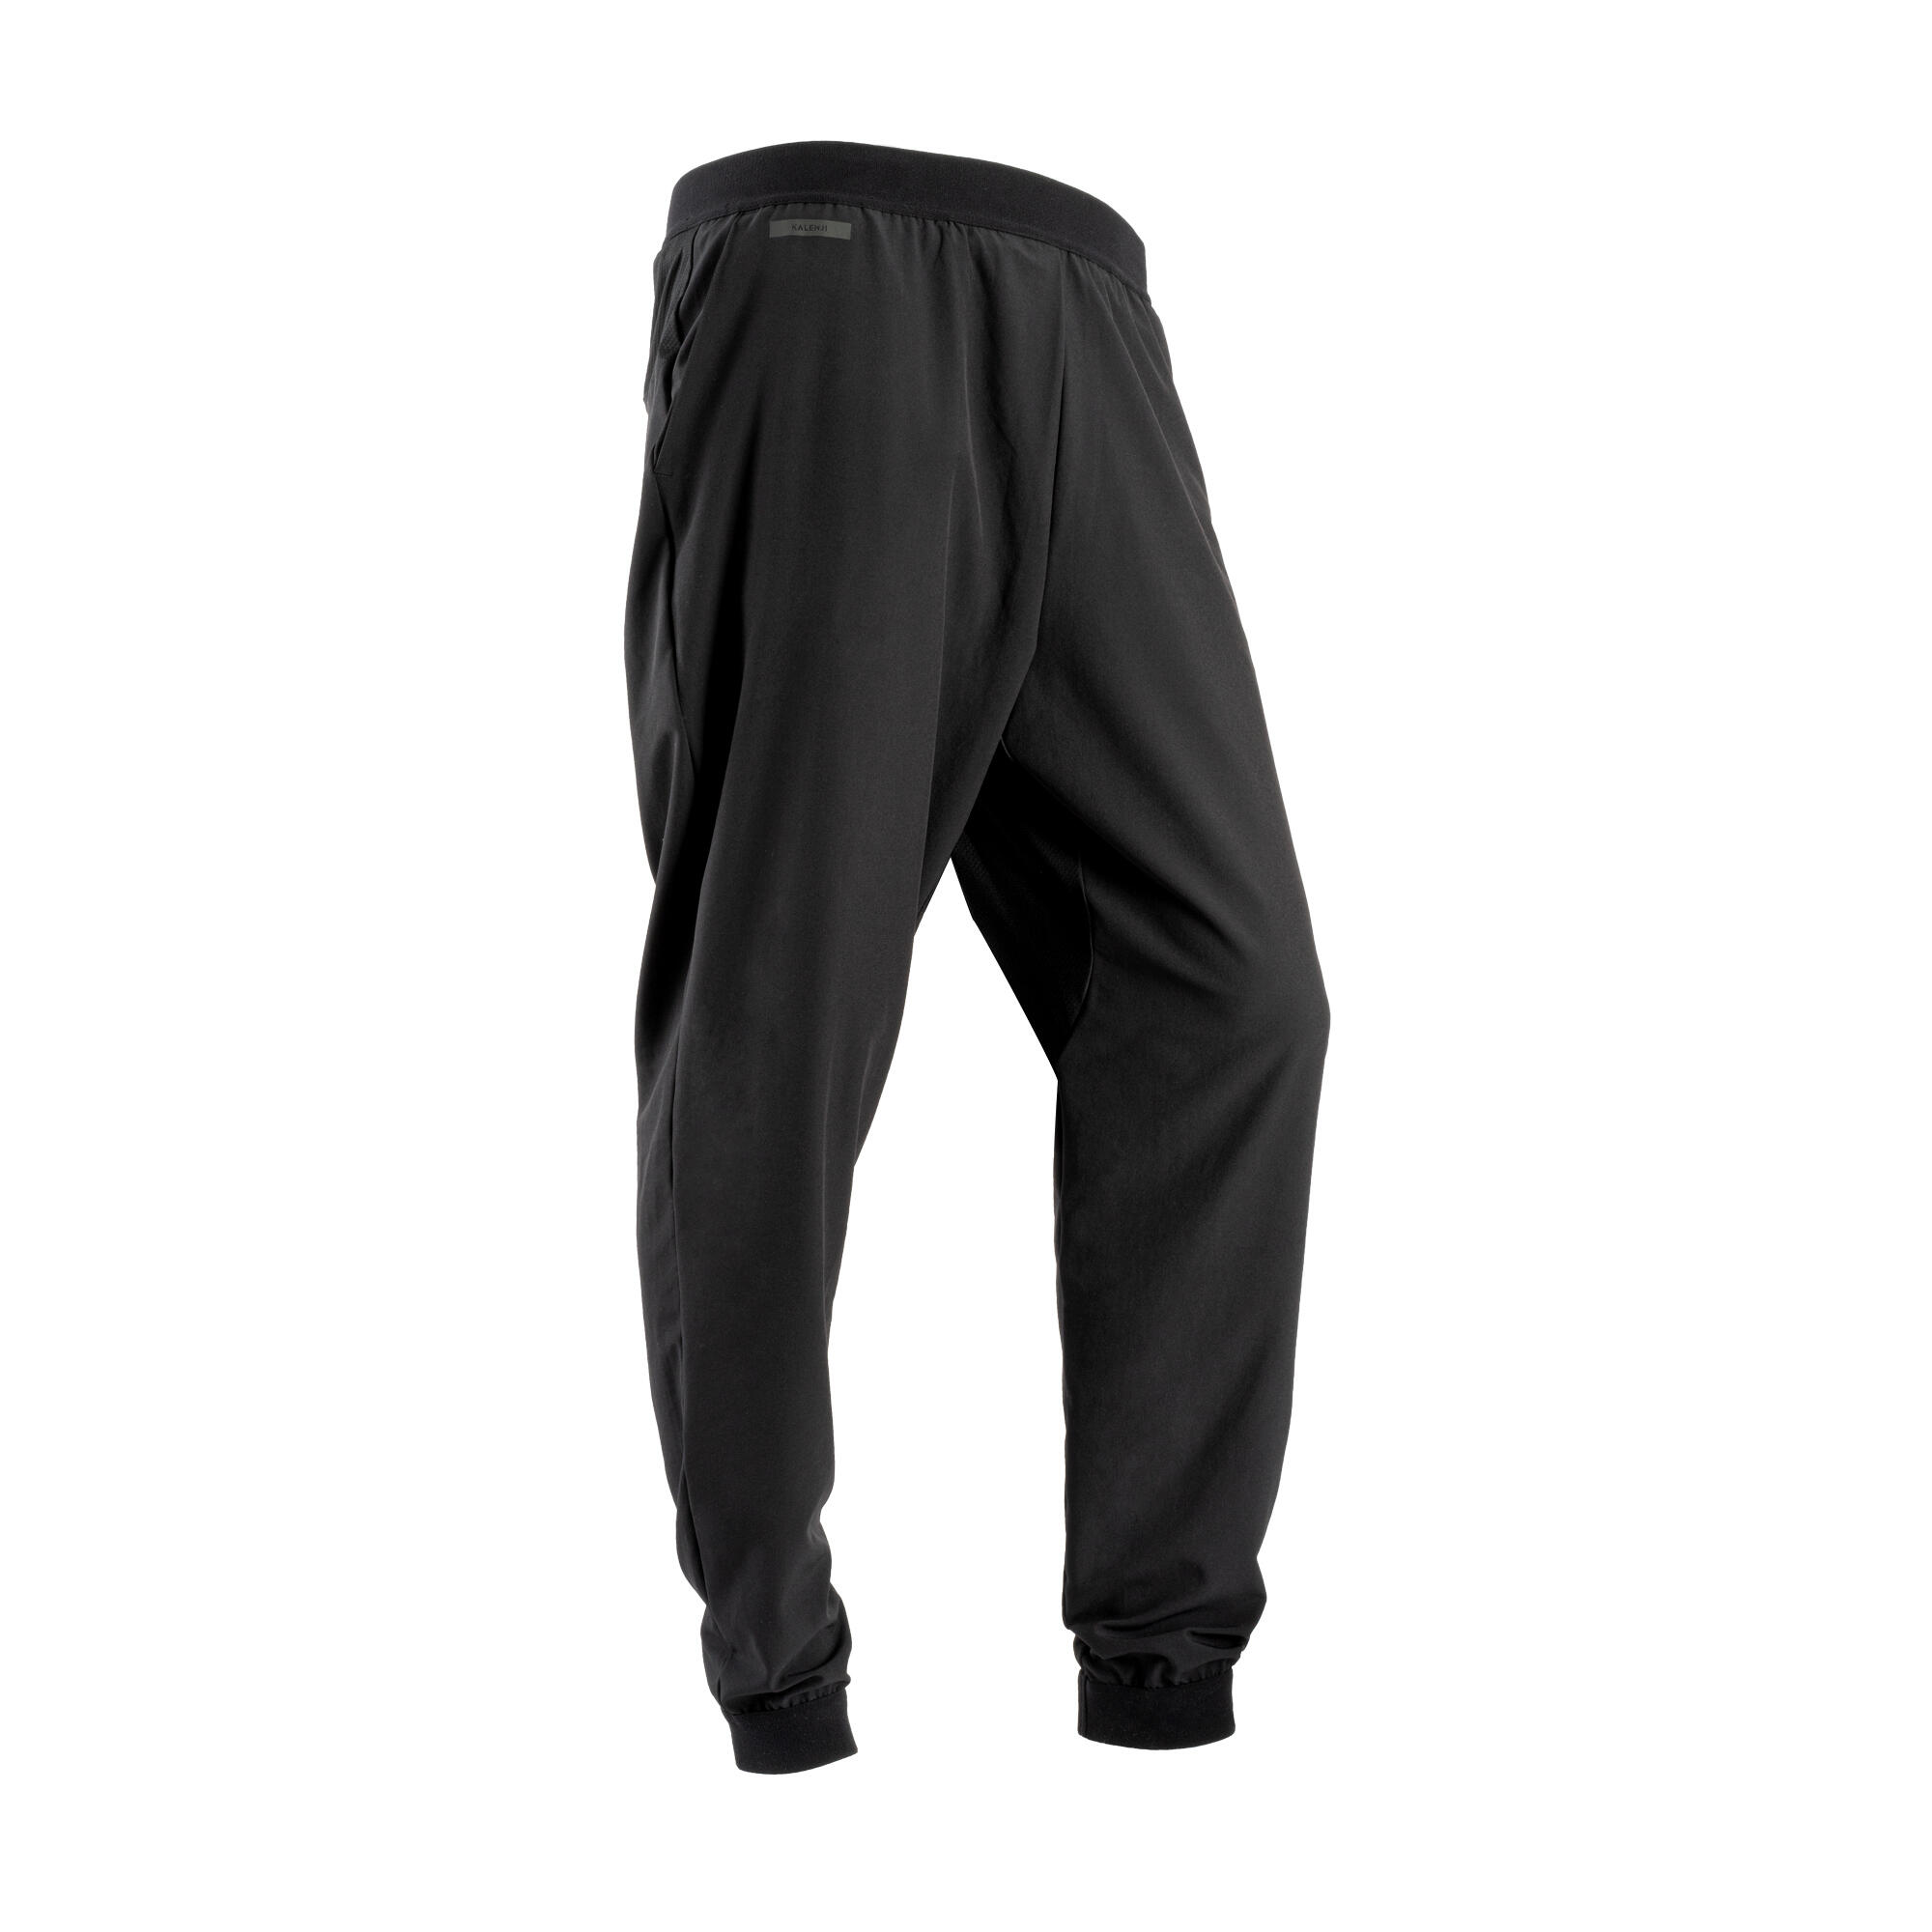 Shop Mens Track Pants Online - FREE* Shipping & Easy Returns - City Beach  New Zealand